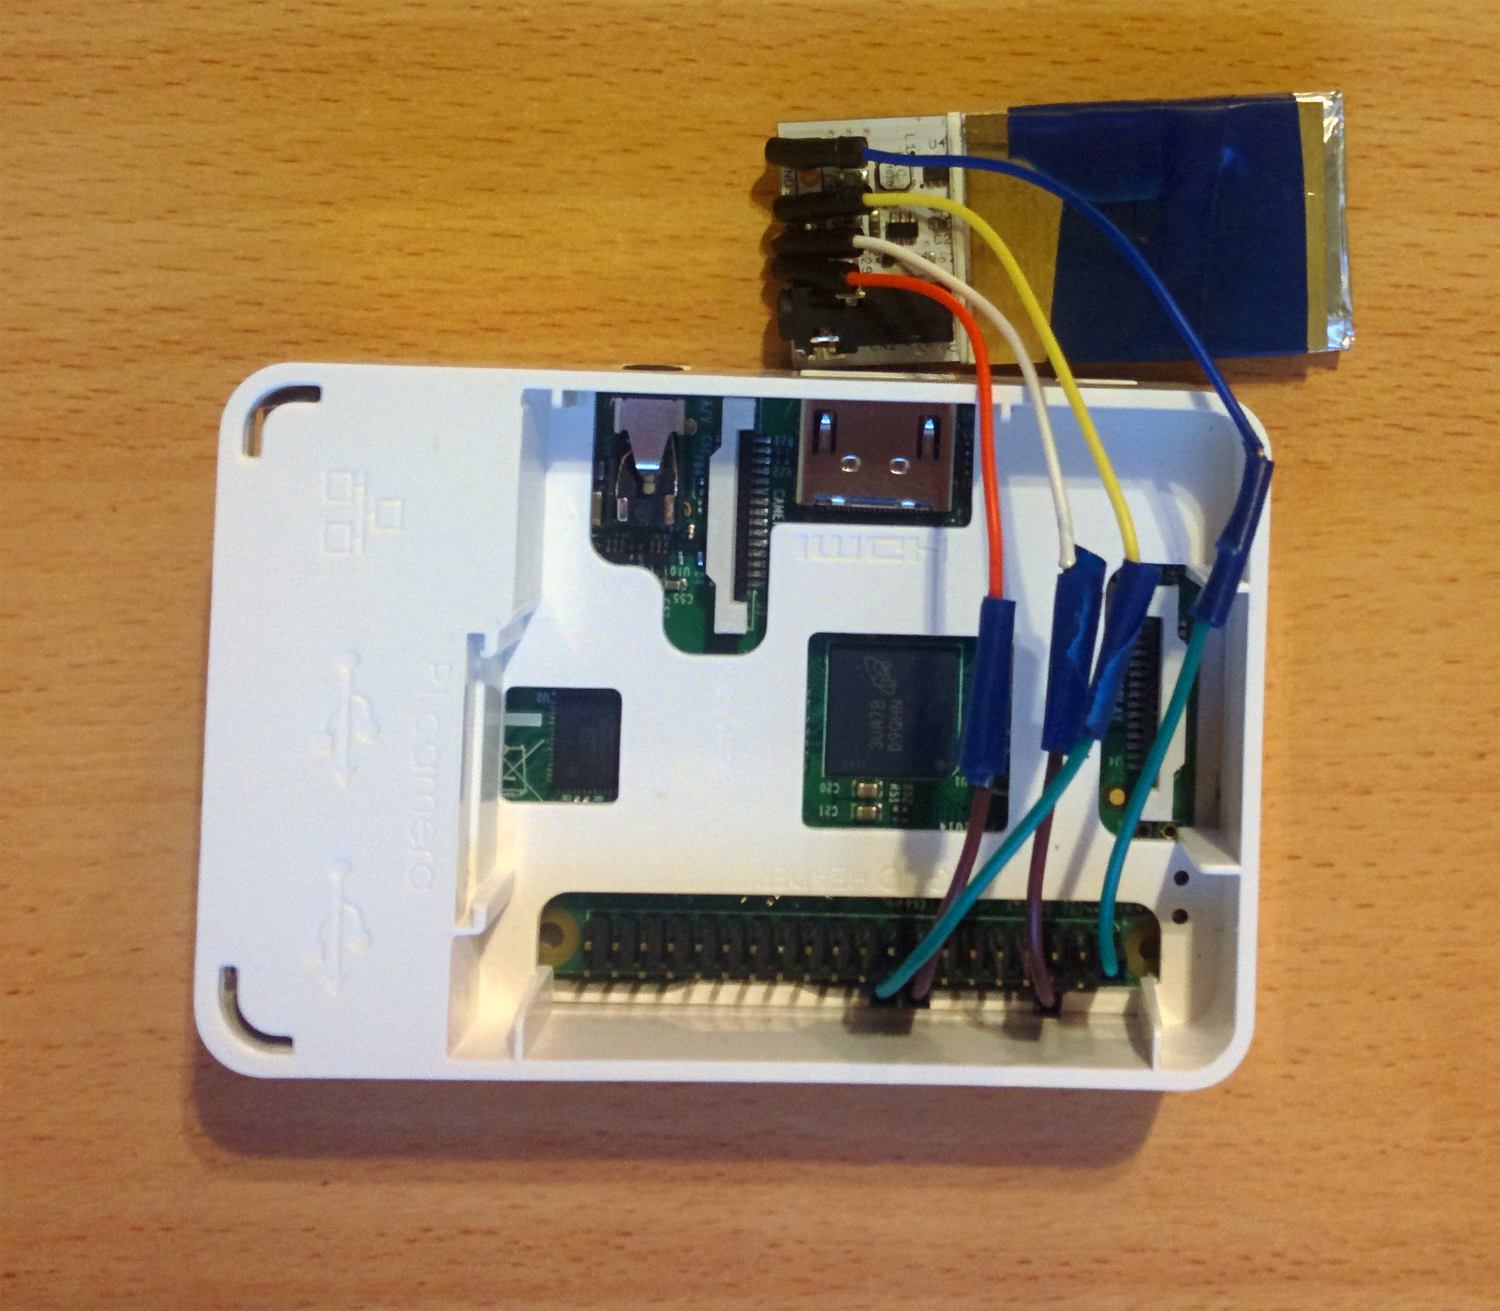 Wiring of Pocket Geiger and Raspberry Pi